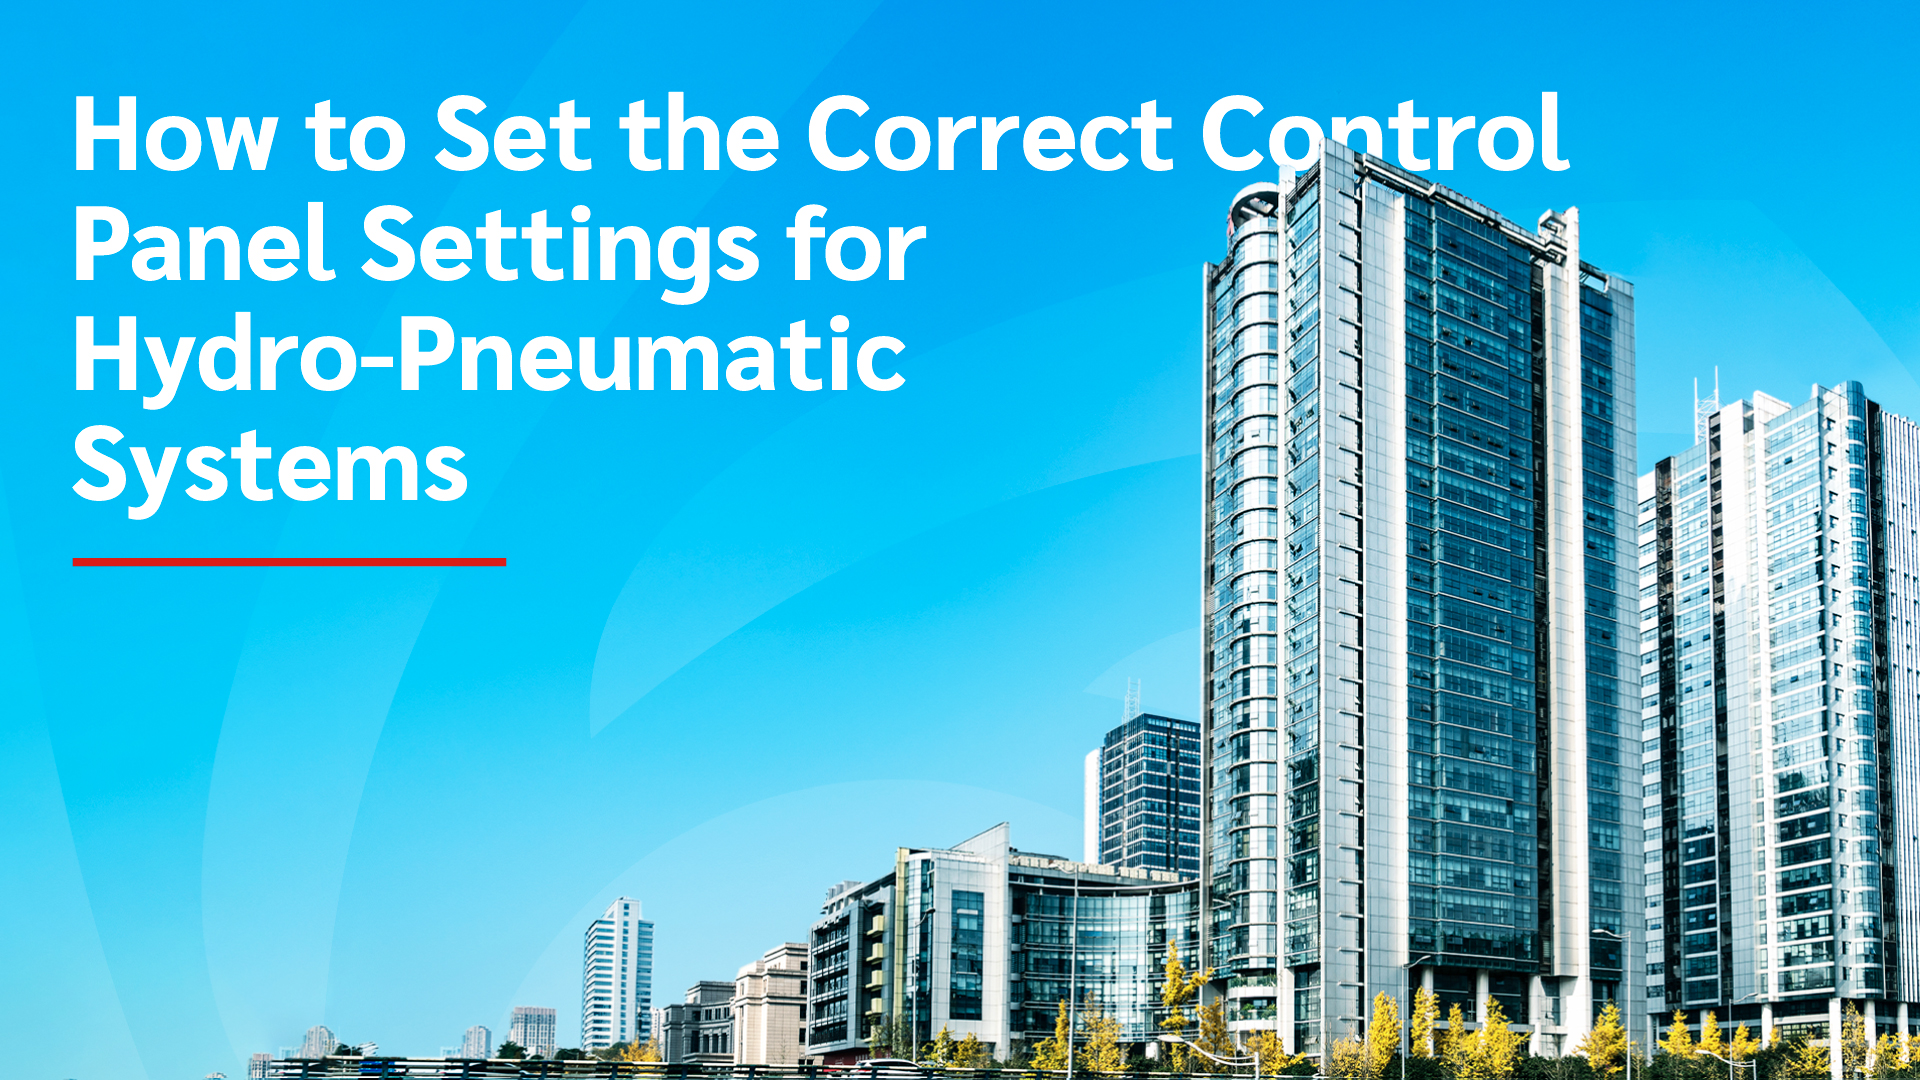 How to Set the Correct Control Panel Settings for Hydro-Pneumatic Systems